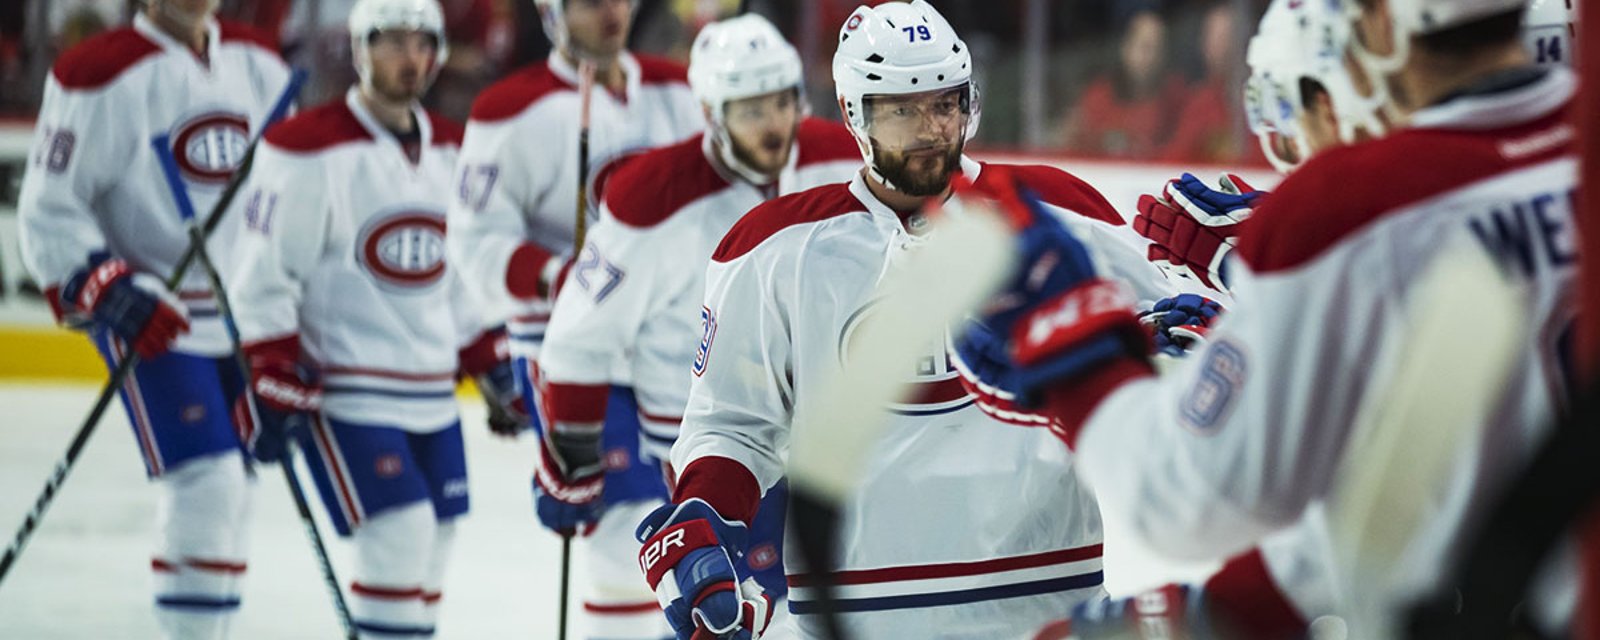 Breaking: Montreal Canadiens' forward out with concussion symptoms